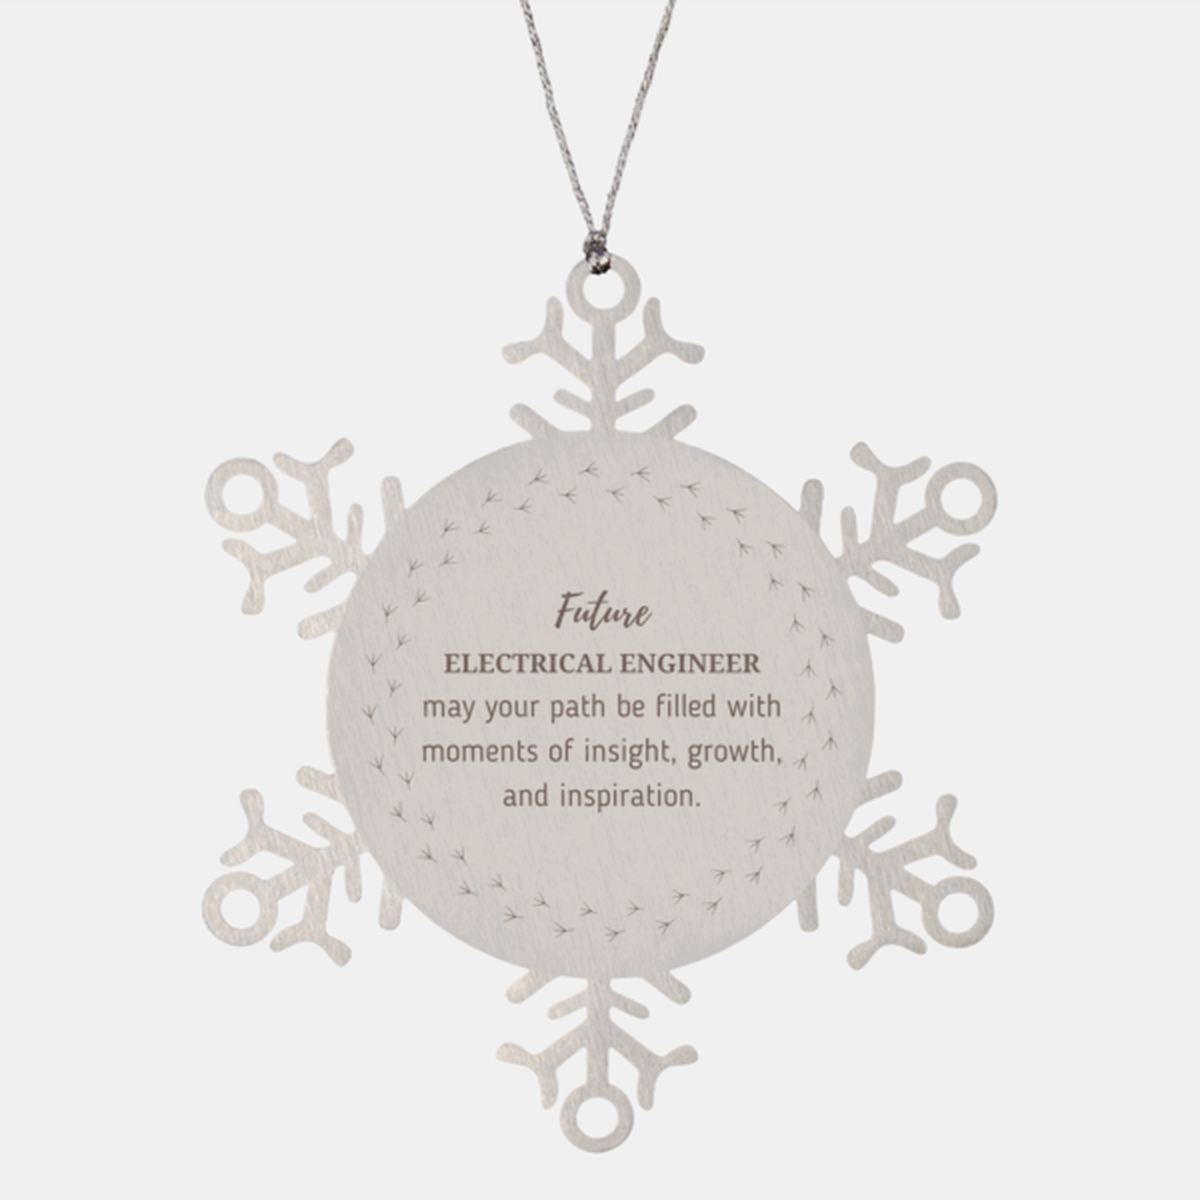 Future Electrical Engineer Gifts, May your path be filled with moments of insight, Graduation Gifts for New Electrical Engineer, Christmas Unique Snowflake Ornament For Men, Women, Friends